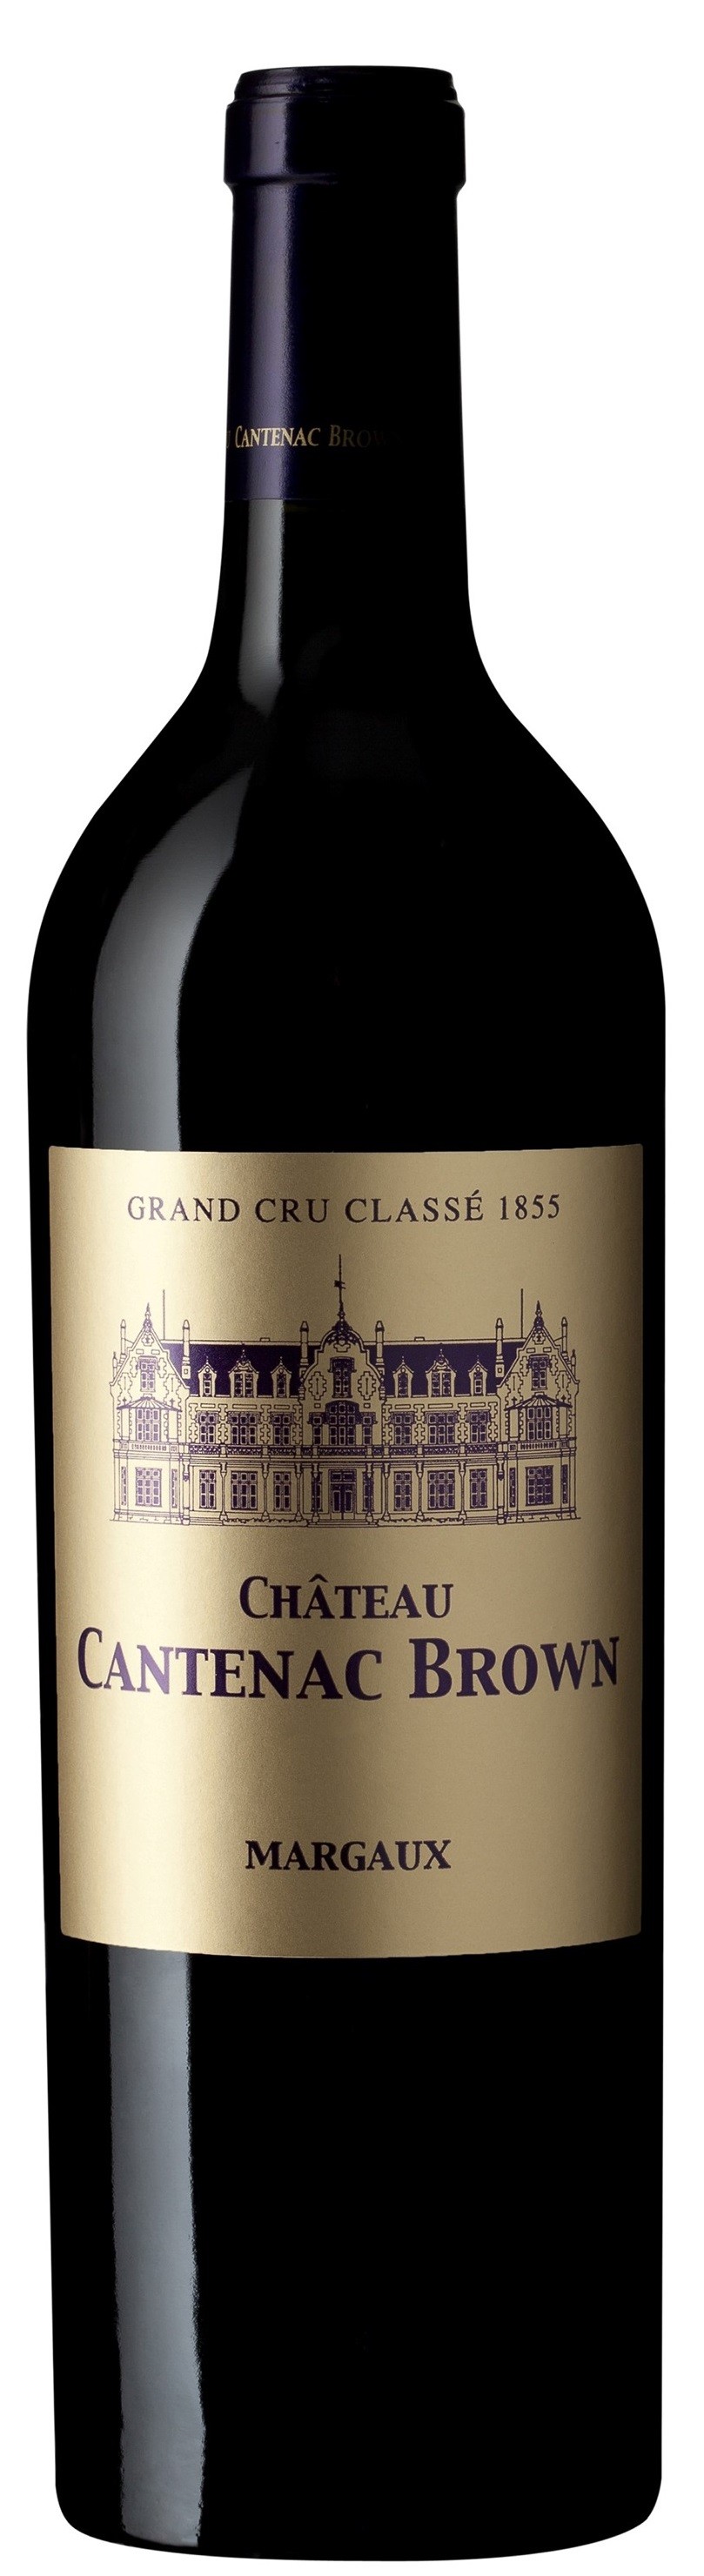 Chateau Cantenac Brown 2018, Margaux